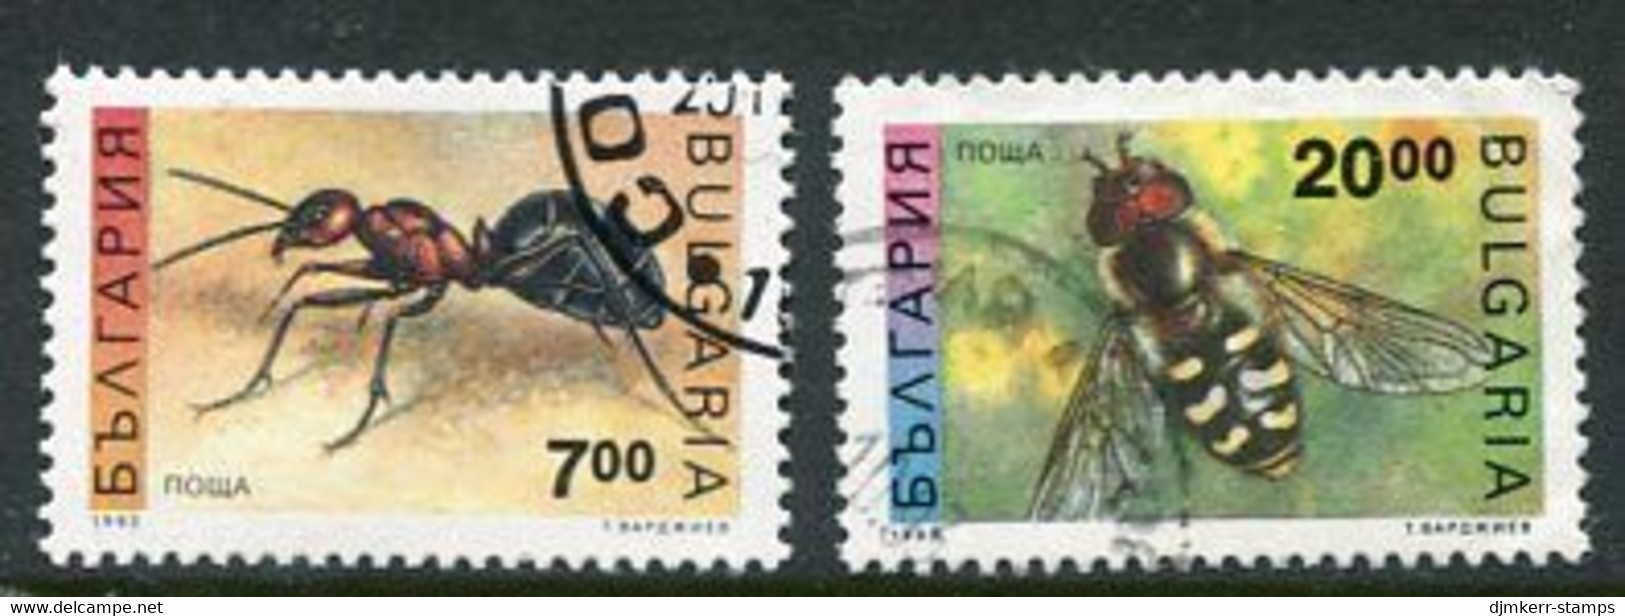 BULGARIA 1992 Insect Definitive 7, 20 L. Used.  Michel 3998-99 - Used Stamps